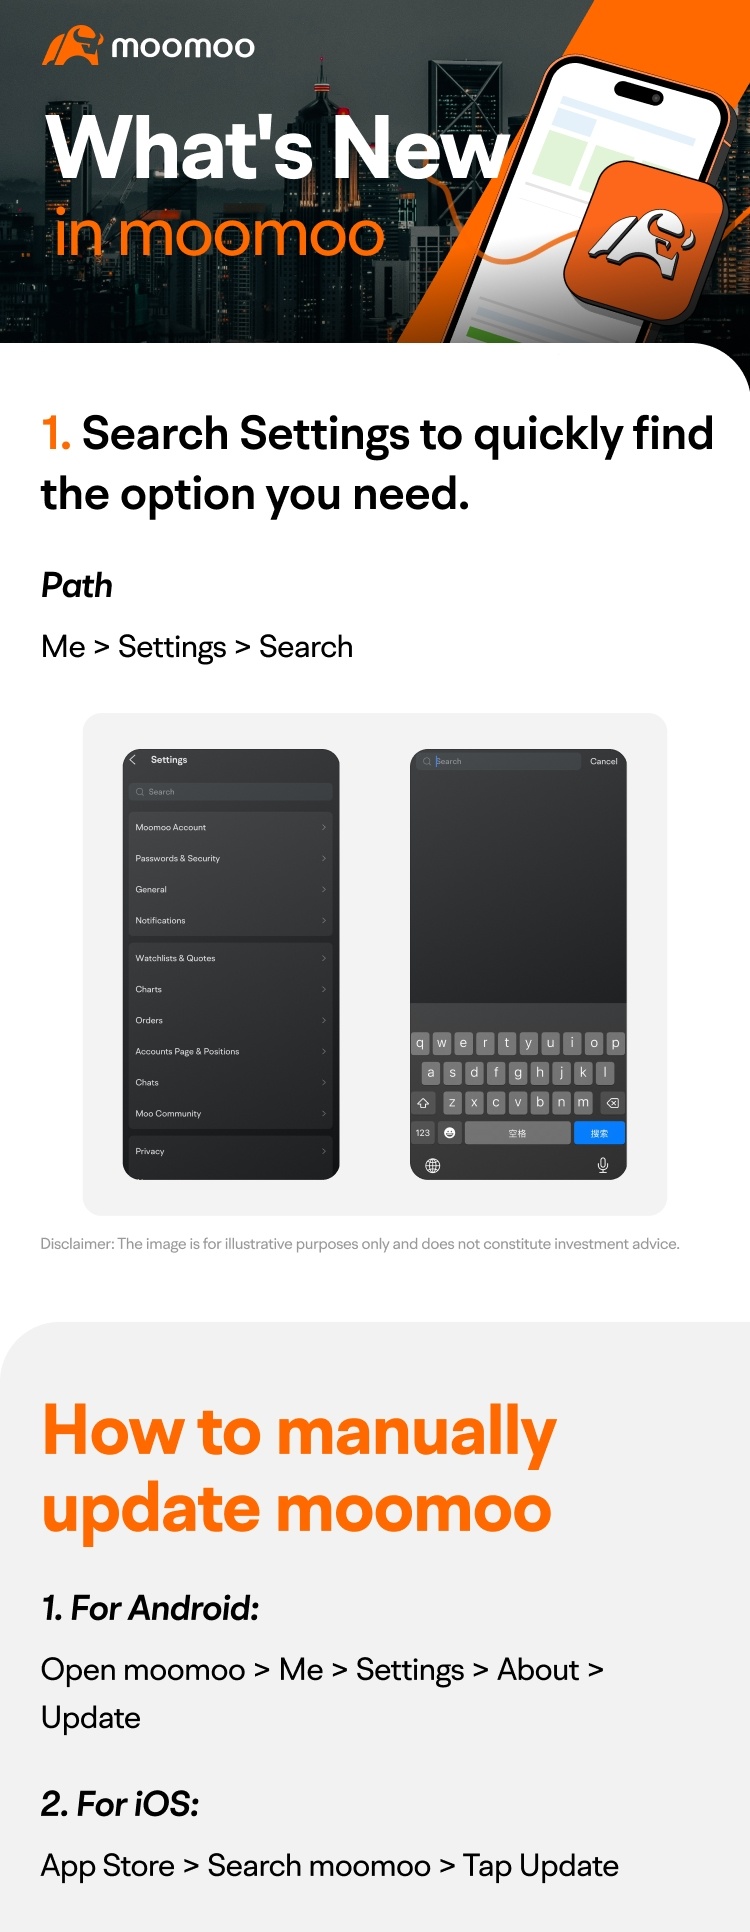 What's New: Search Settings to quickly find the option you need!